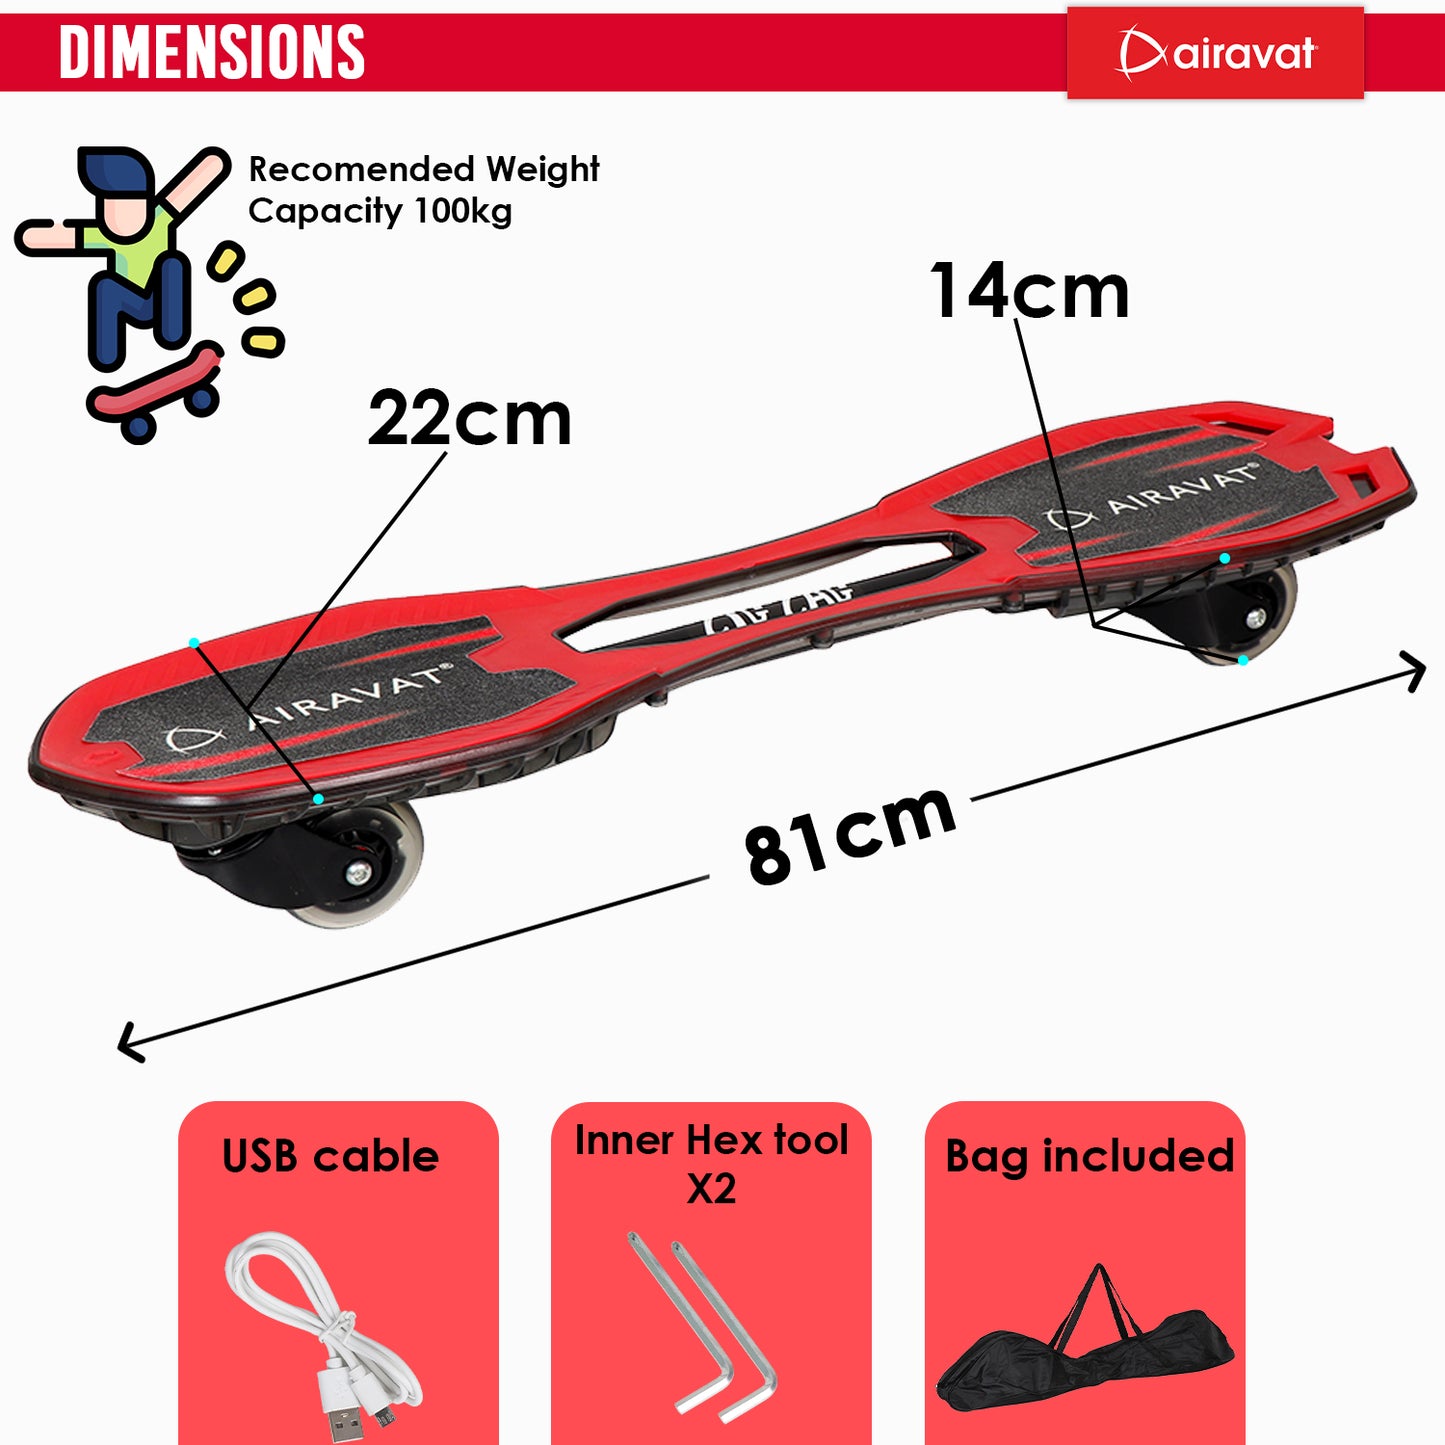 7803-dimensions-of-zig-zag-waveboard-red